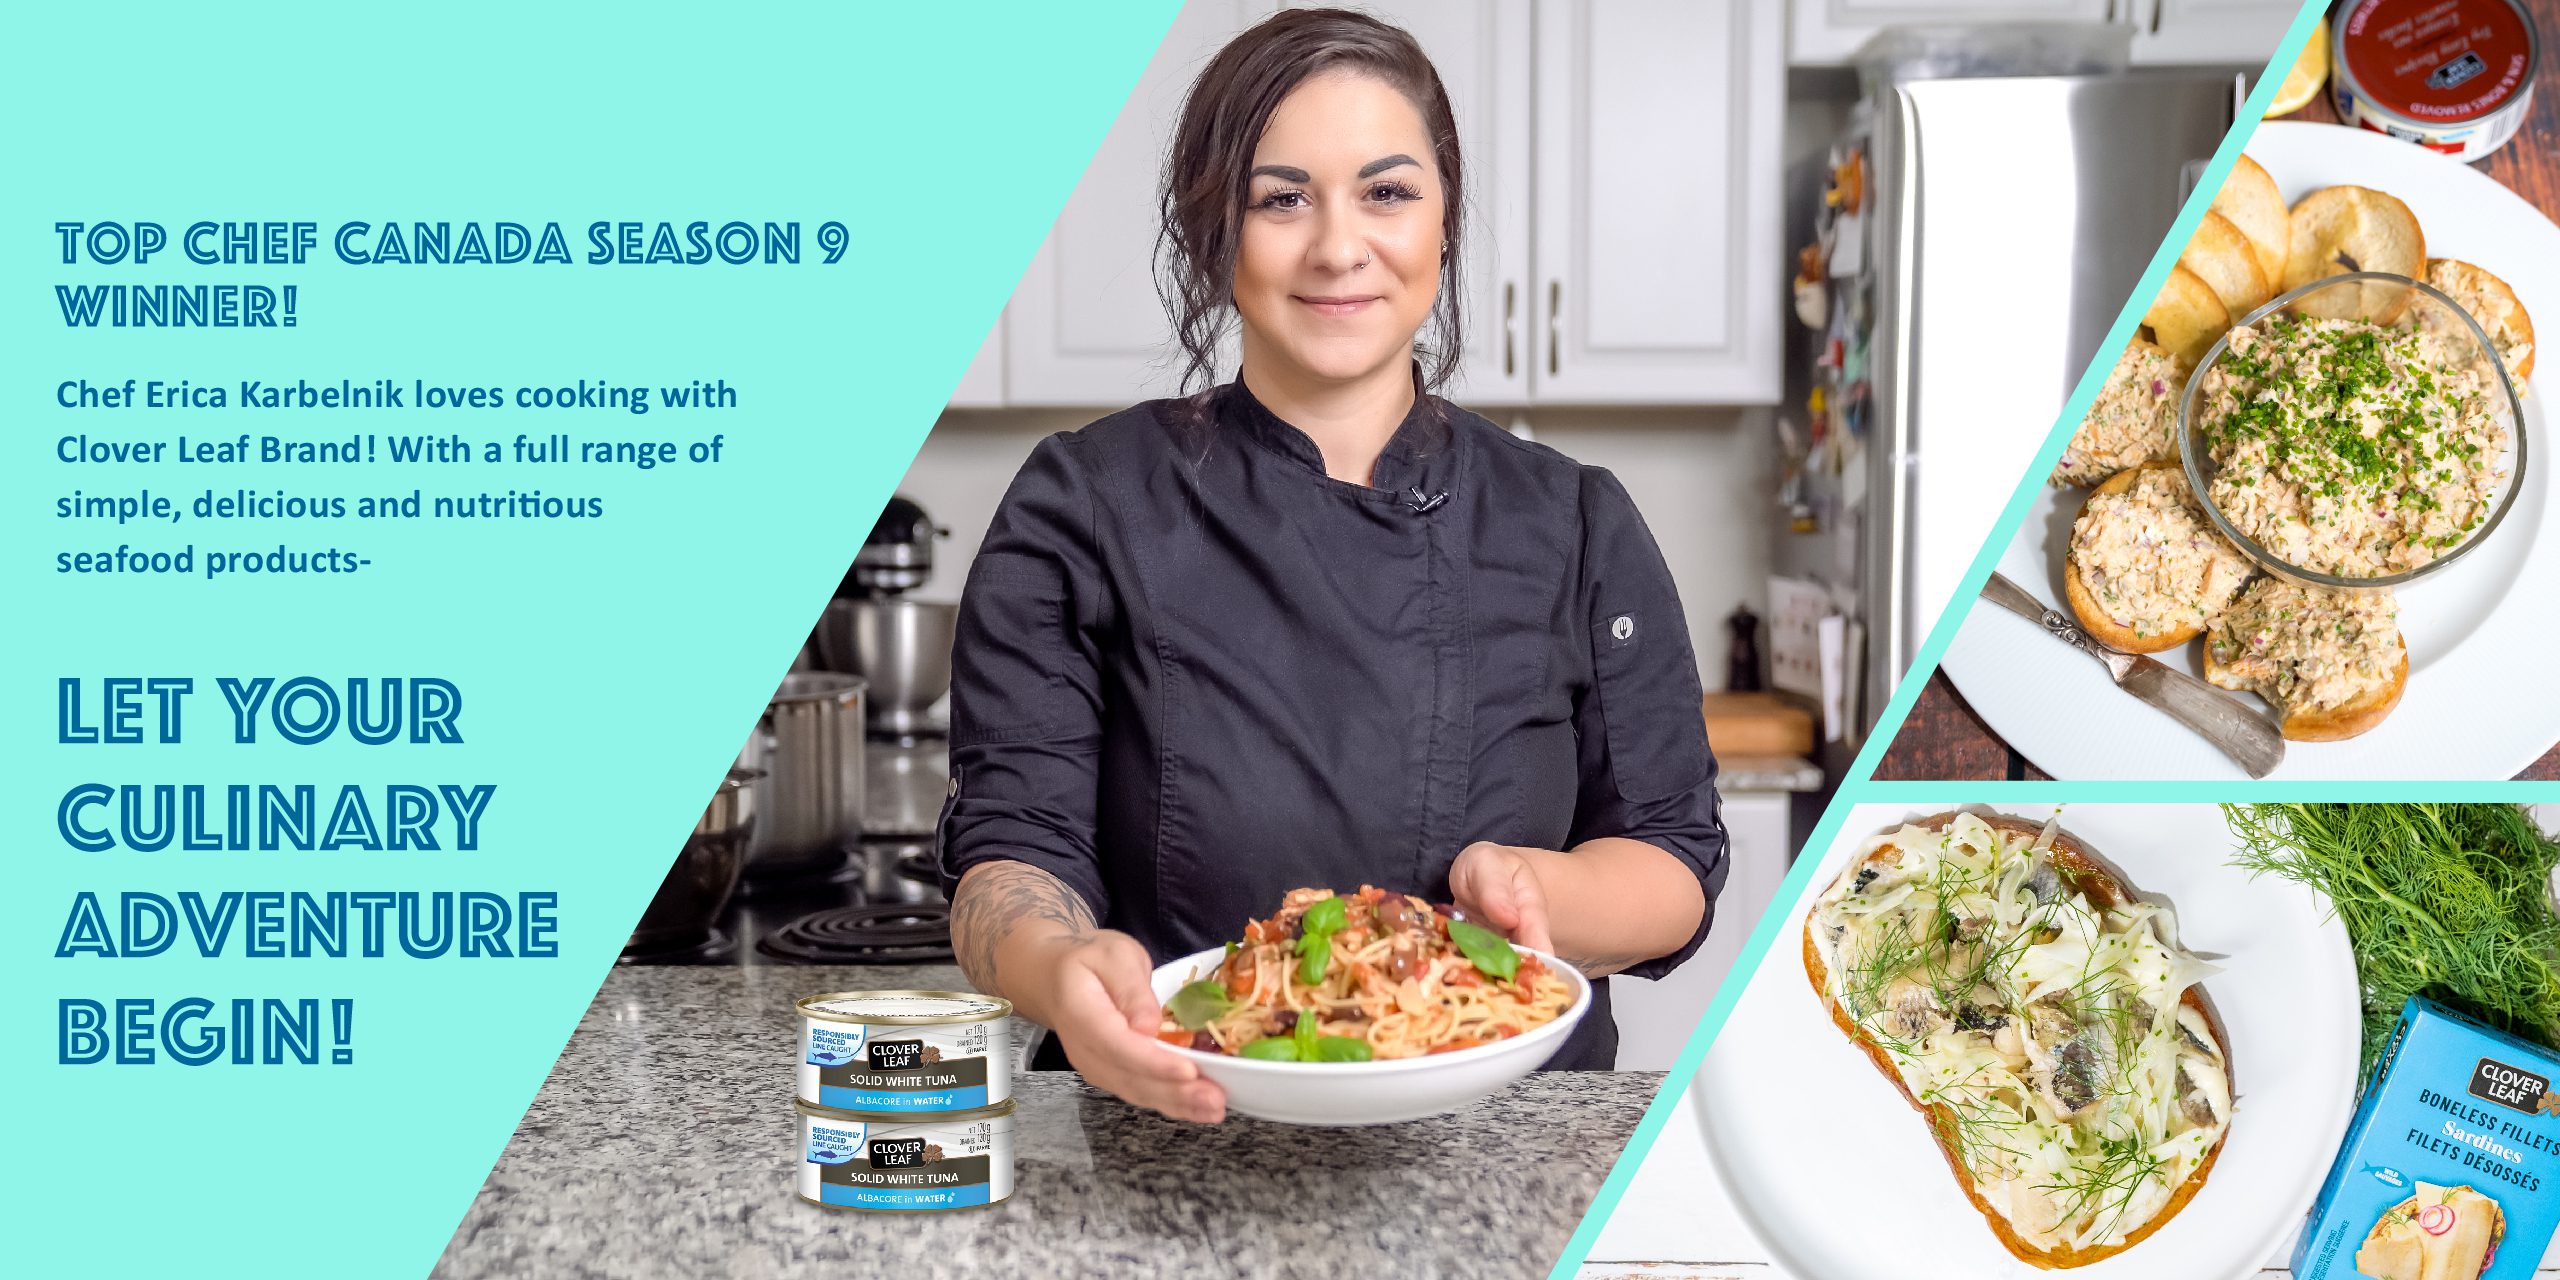 Top Chef Canada season 9 winner! Chef Erica Karbelnik loves cooking with Clover Leaf Brand! With a full range of simple, delicious and nutritious seafood products,  LET YOUR  CULINARY ADVENTURE  BEGIN!